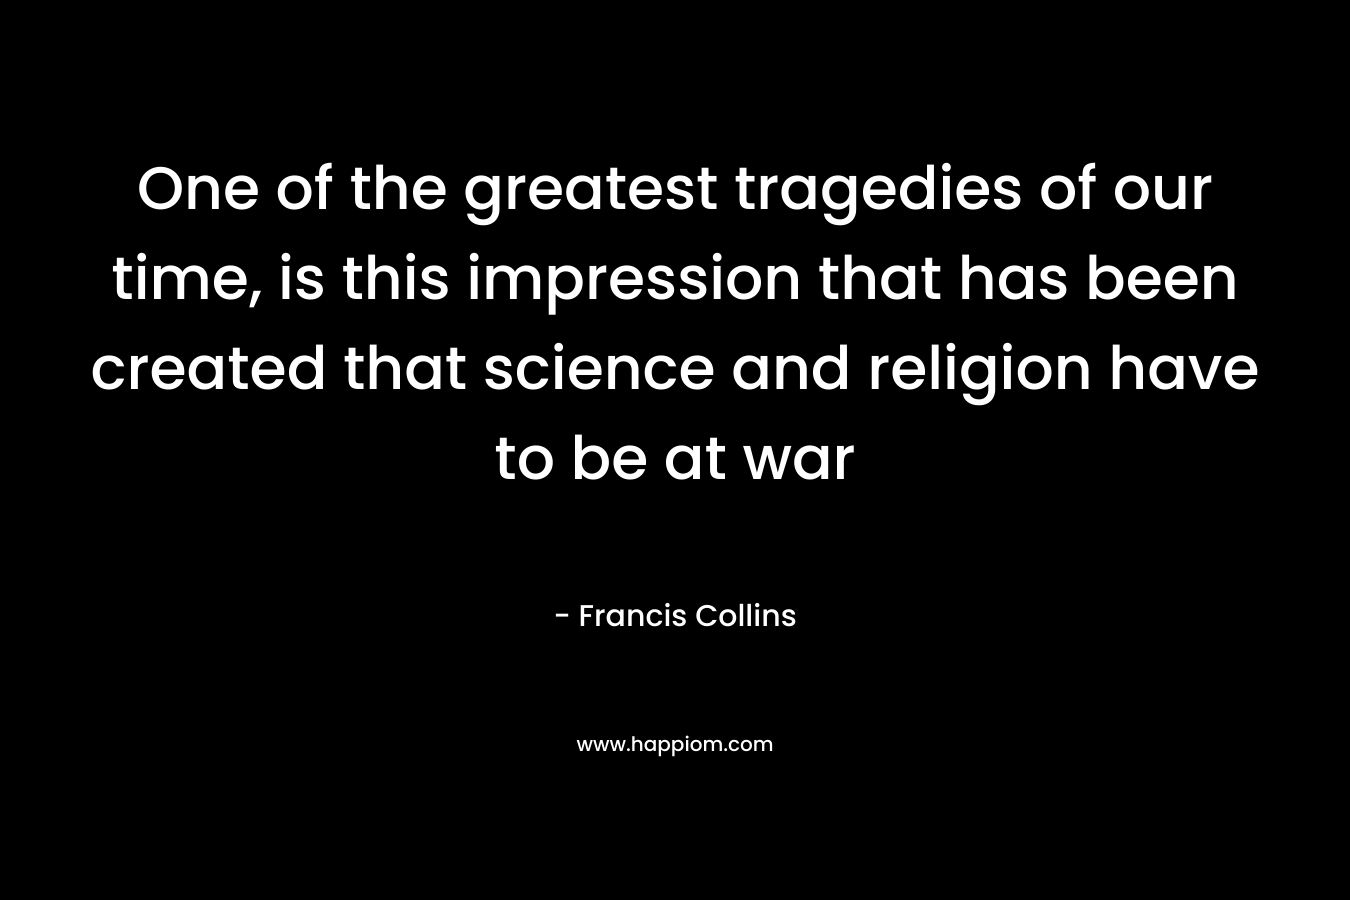 One of the greatest tragedies of our time, is this impression that has been created that science and religion have to be at war – Francis Collins